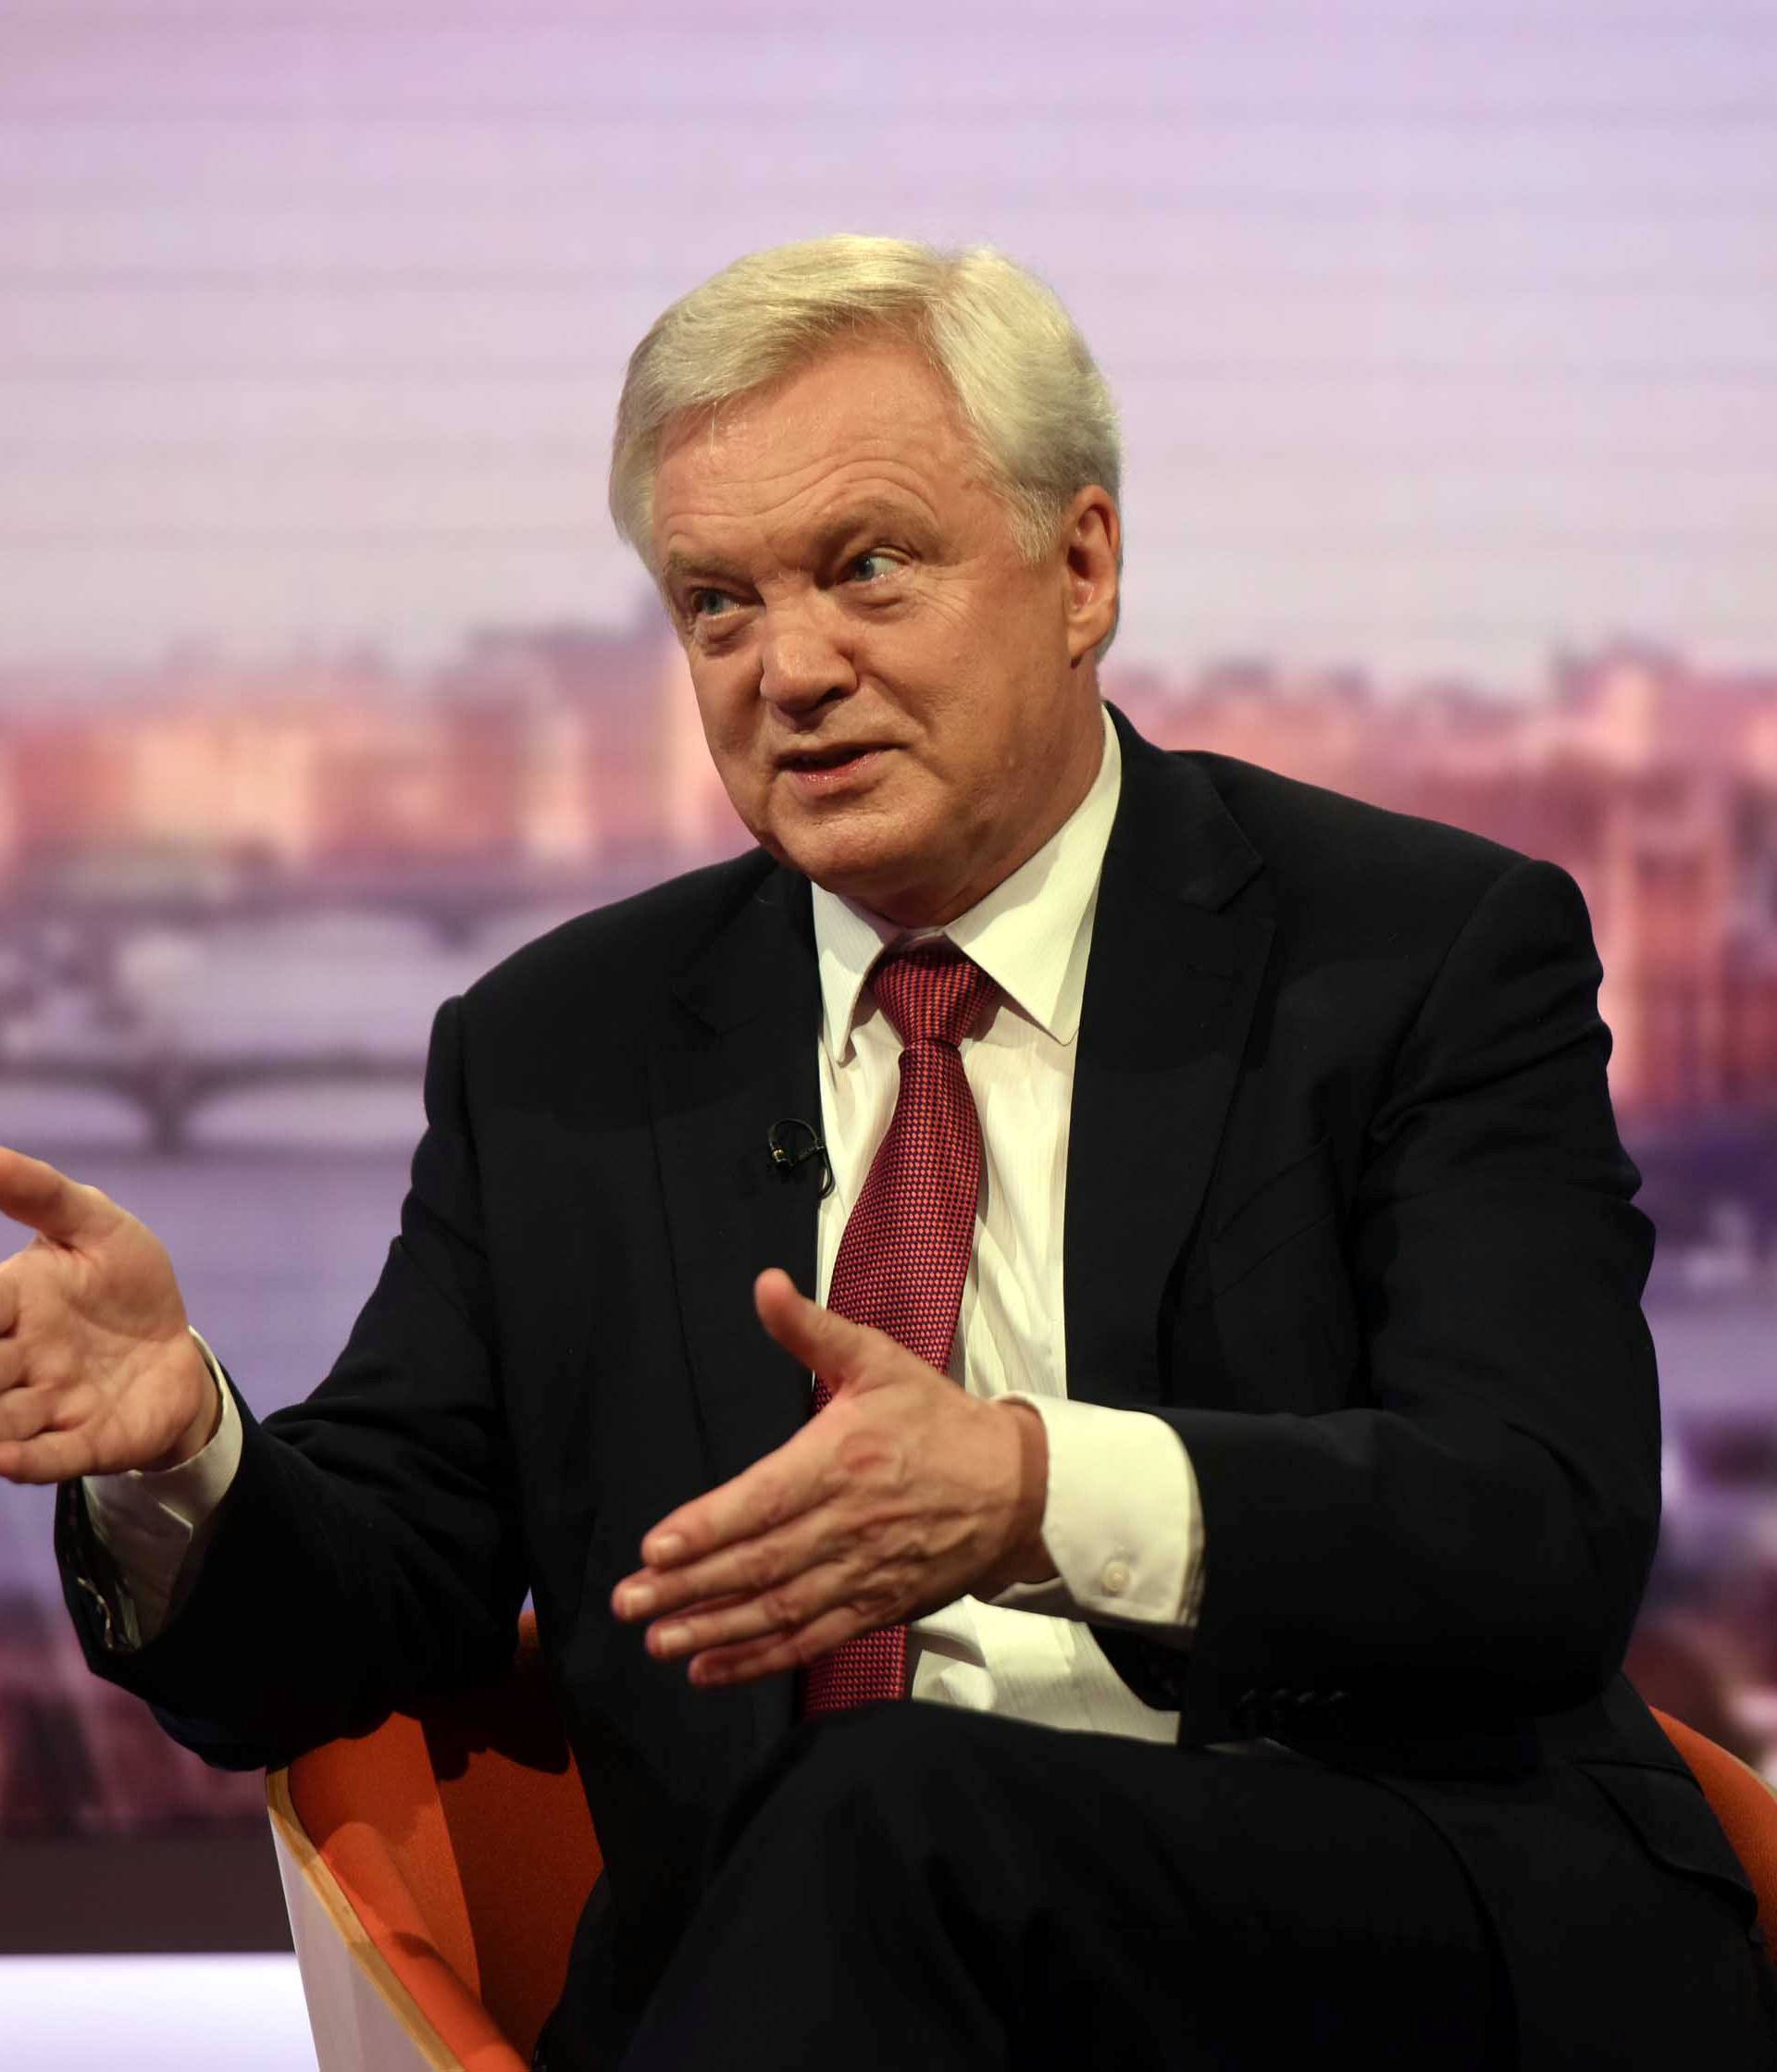 Britain's Secretary of State for Exiting the European Union, David Davis, is seen speaking on the BBC's Andrew Marr Show, in London